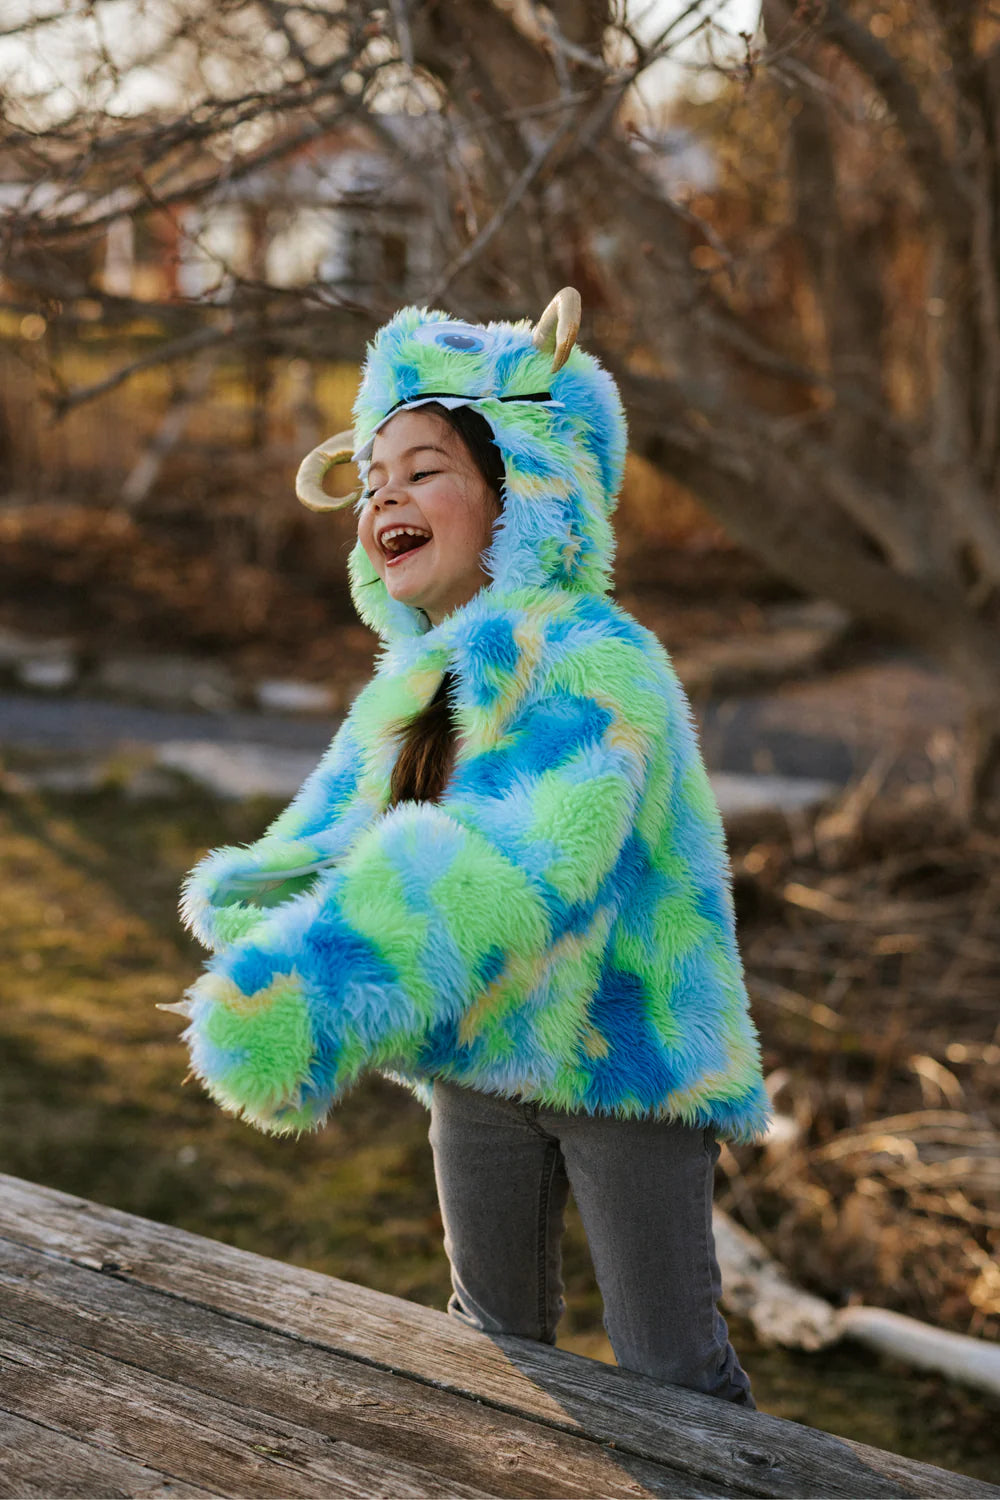 Swampy The Monster Cape, Green/Blue, Size 4-6